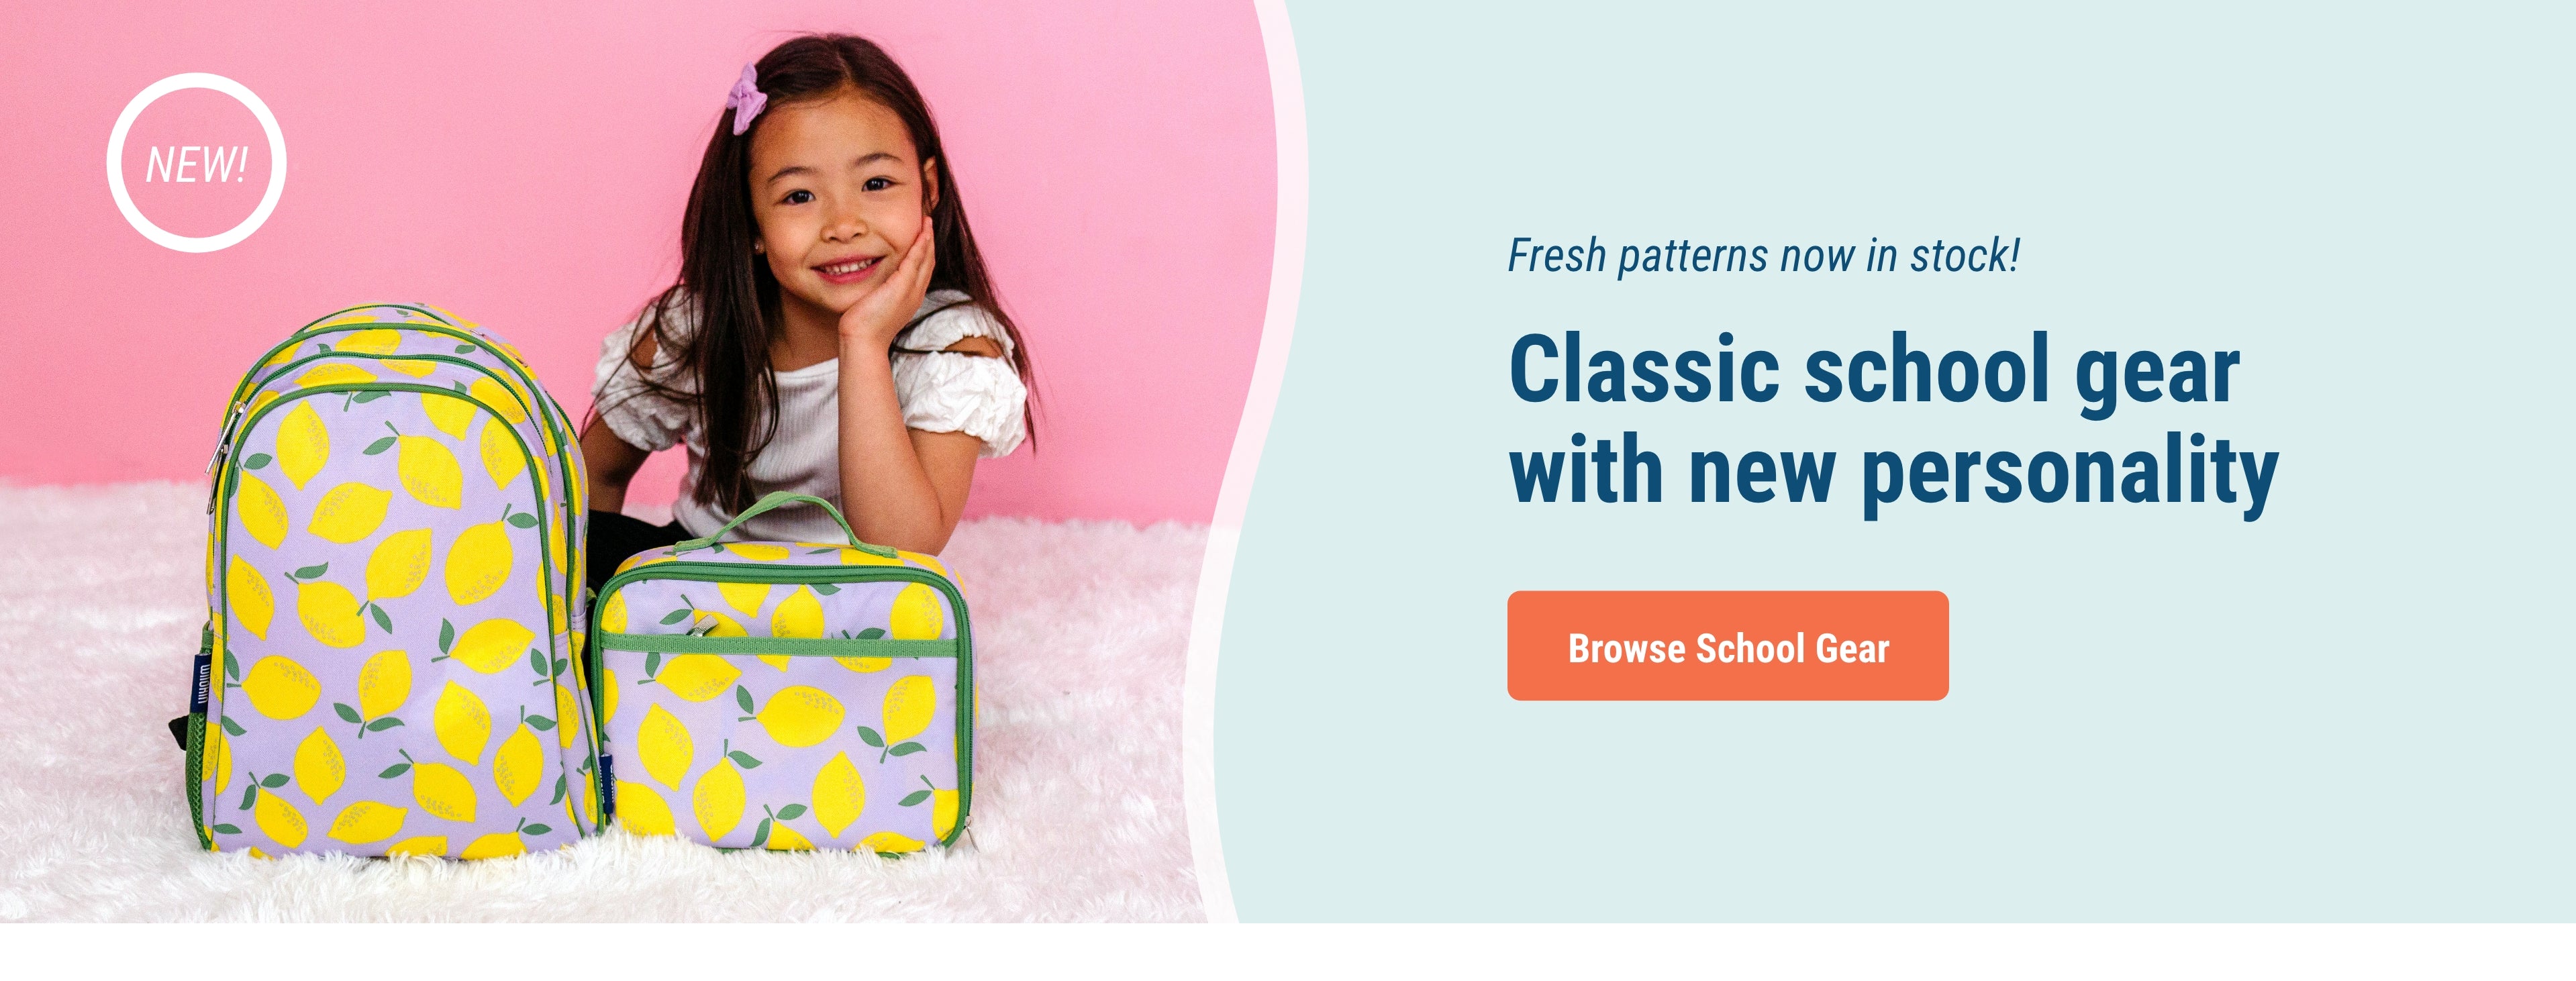 Fresh patterns now in stock! Classic school gear with new personality. Link to Browse school gear. Image of girl sitting on floor with lilac lemonade Lunch box and backpack